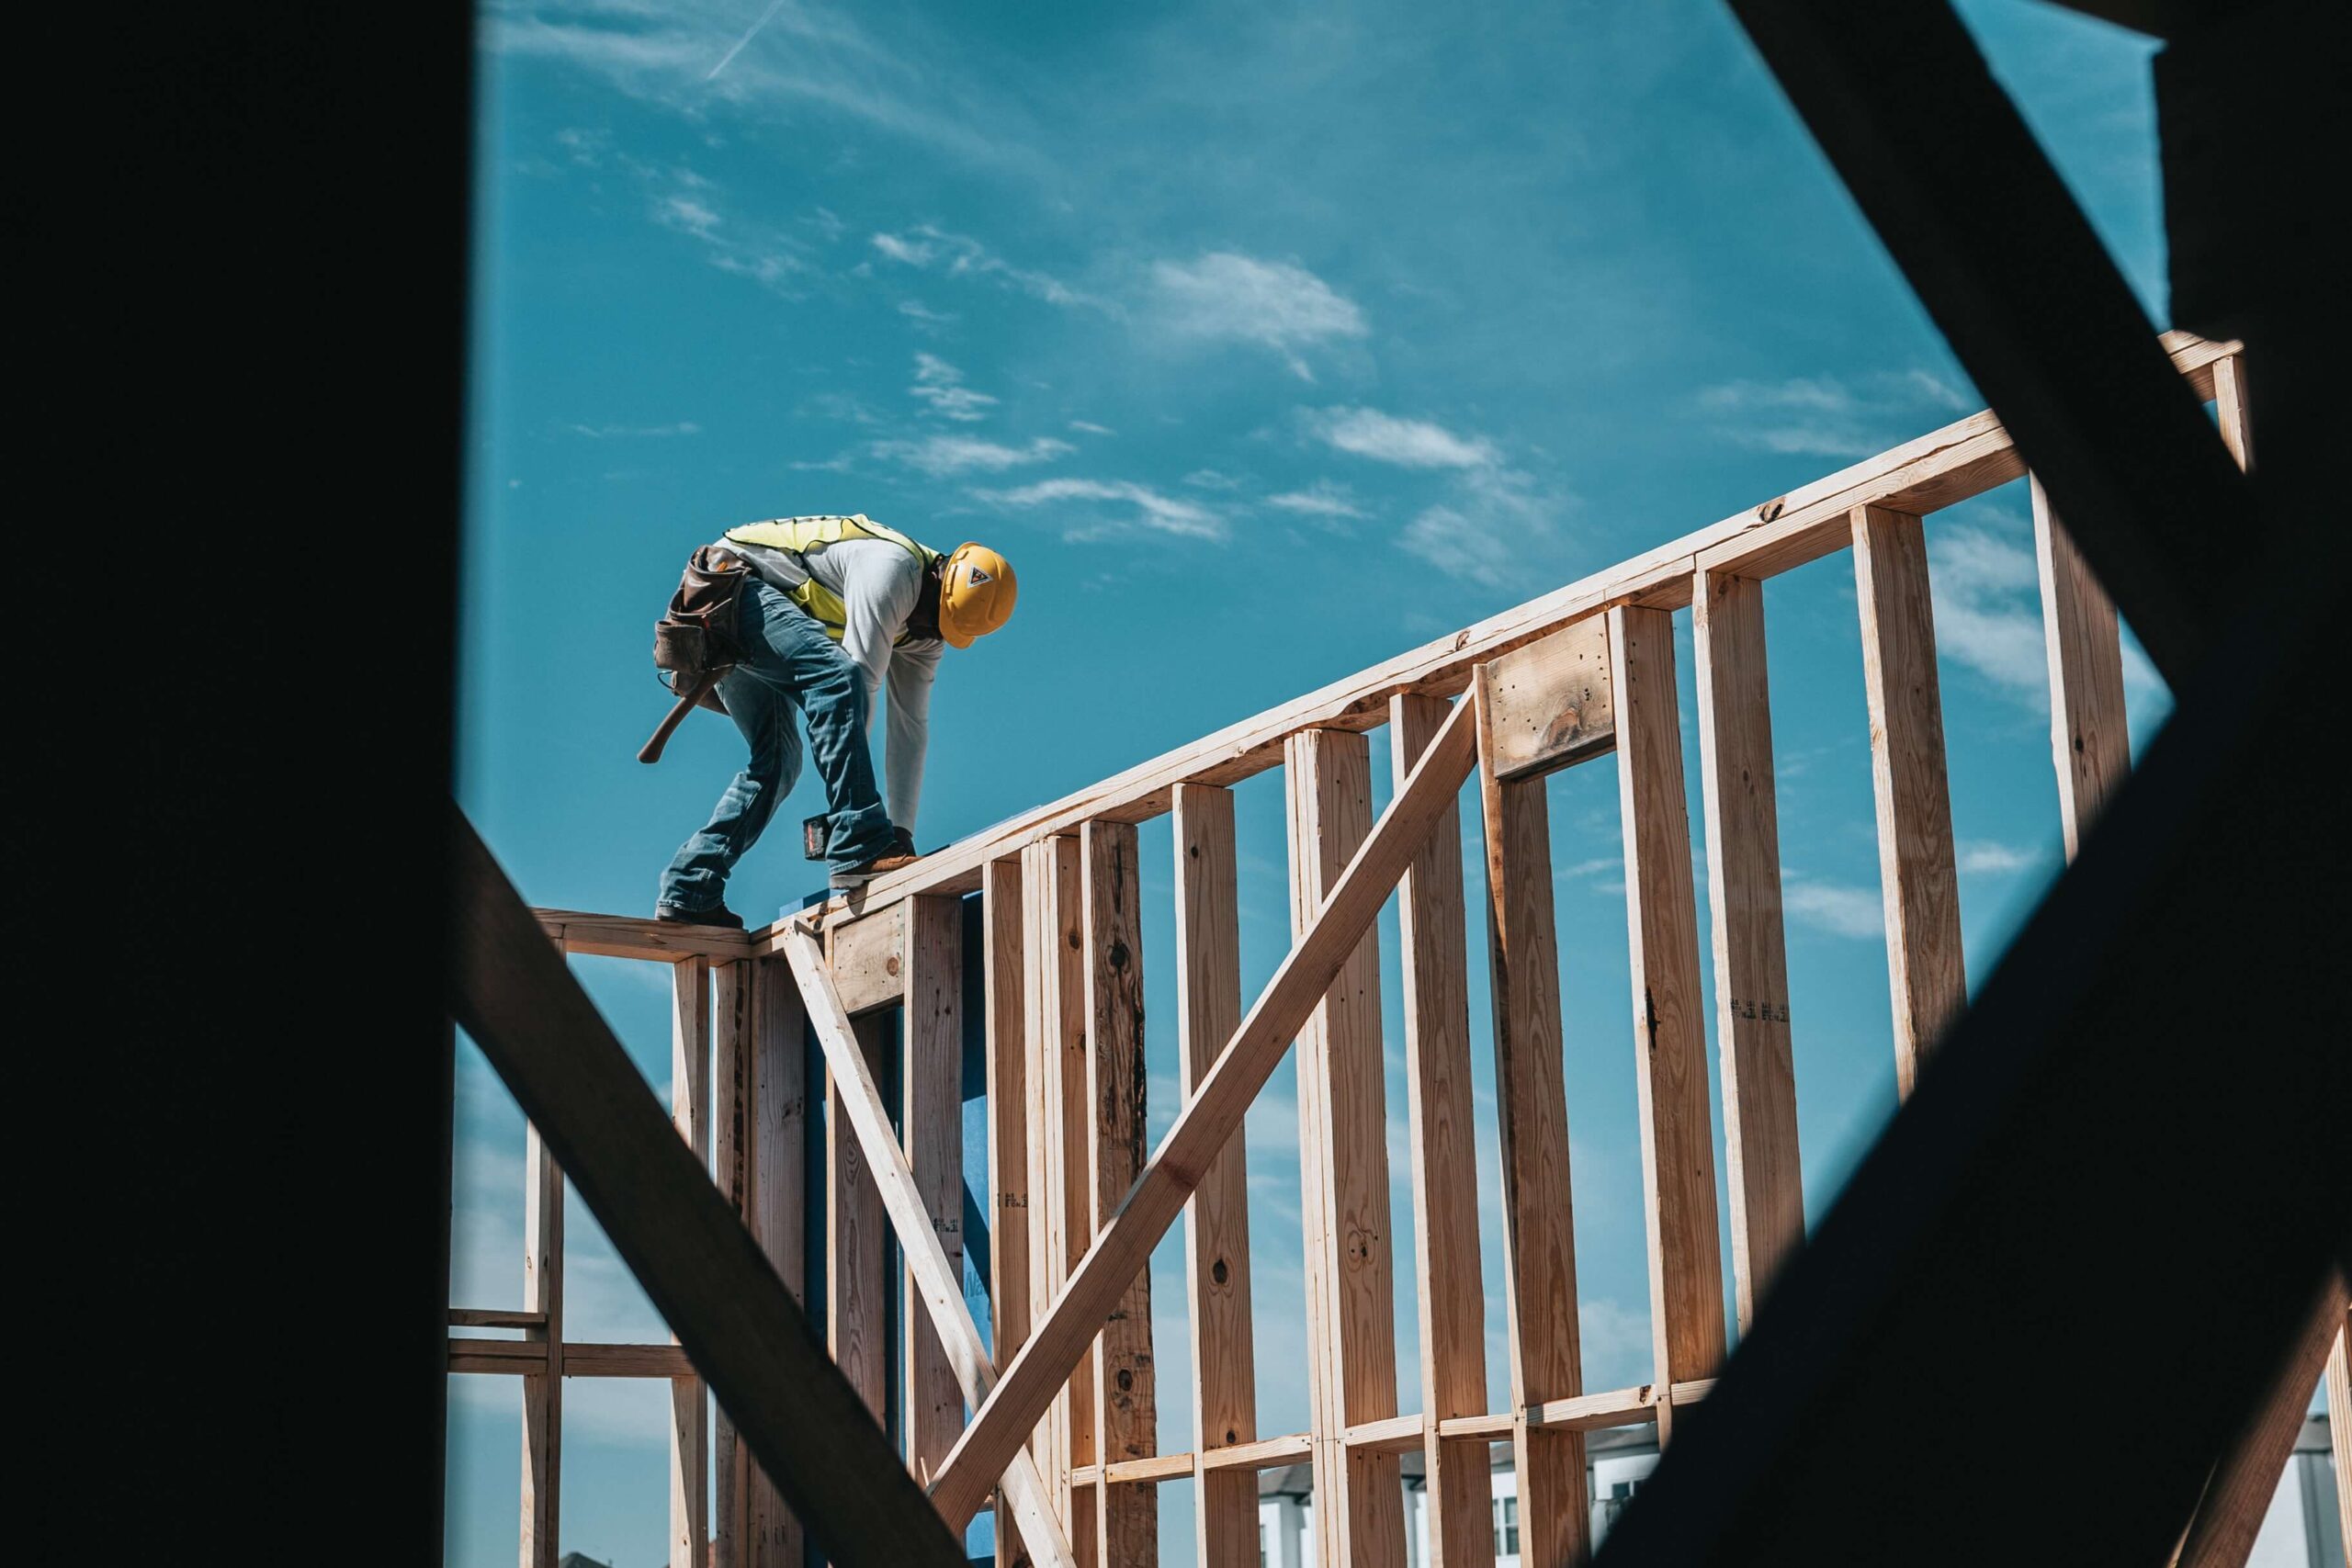 Construction worker completing work on wooden frame structure